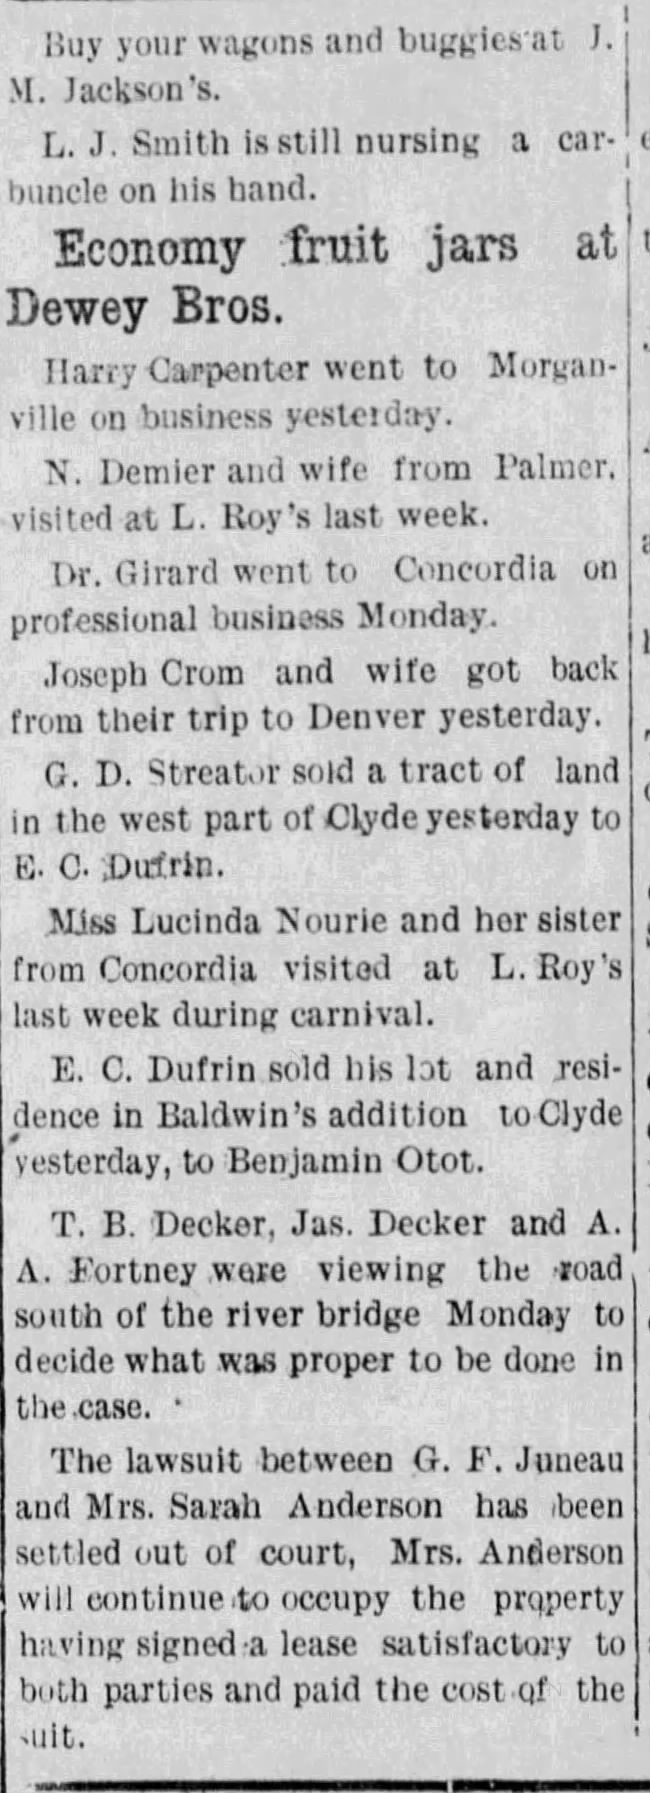 E.C. Dufrin sold lot and residence to Benjamin Otot.